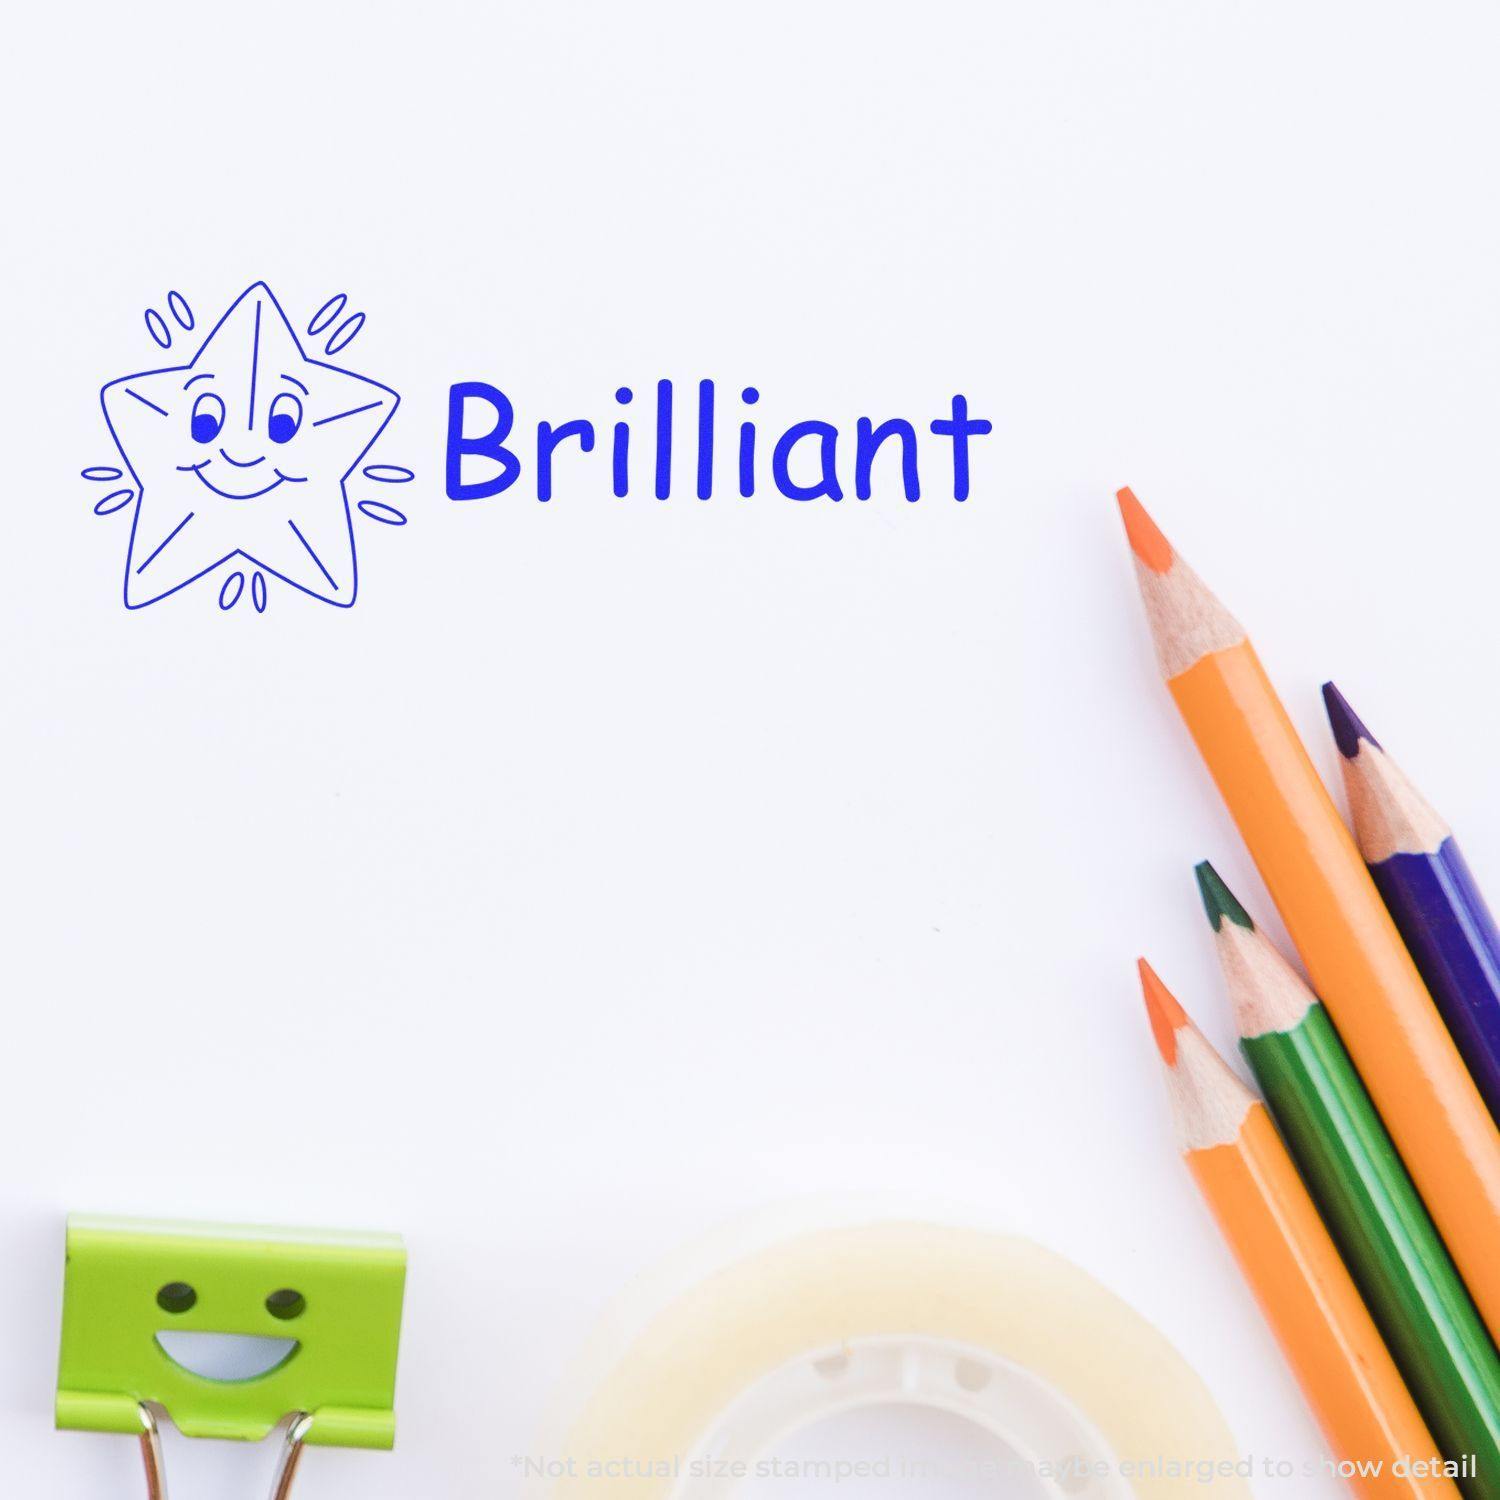 A self-inking stamp with a stamped image showing how the text "Brilliant" with a graphic of a shining star with a smile next to the text is displayed after stamping.